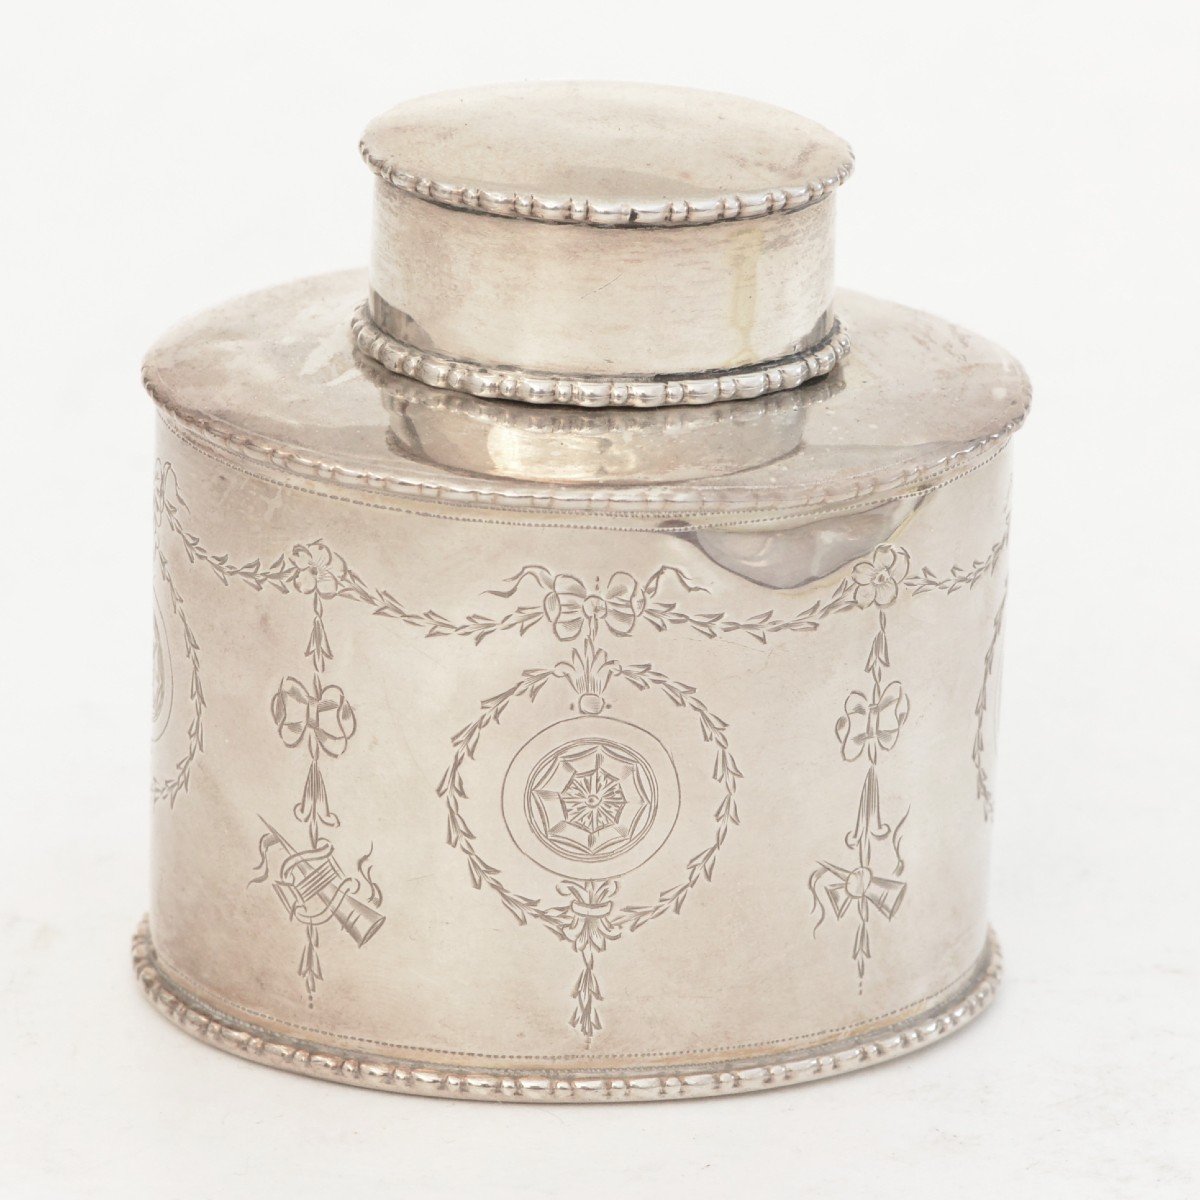 Miniature Tea Caddy Anglais En Argent Massif George Nathan Et Ridley Hayes Chester 1909